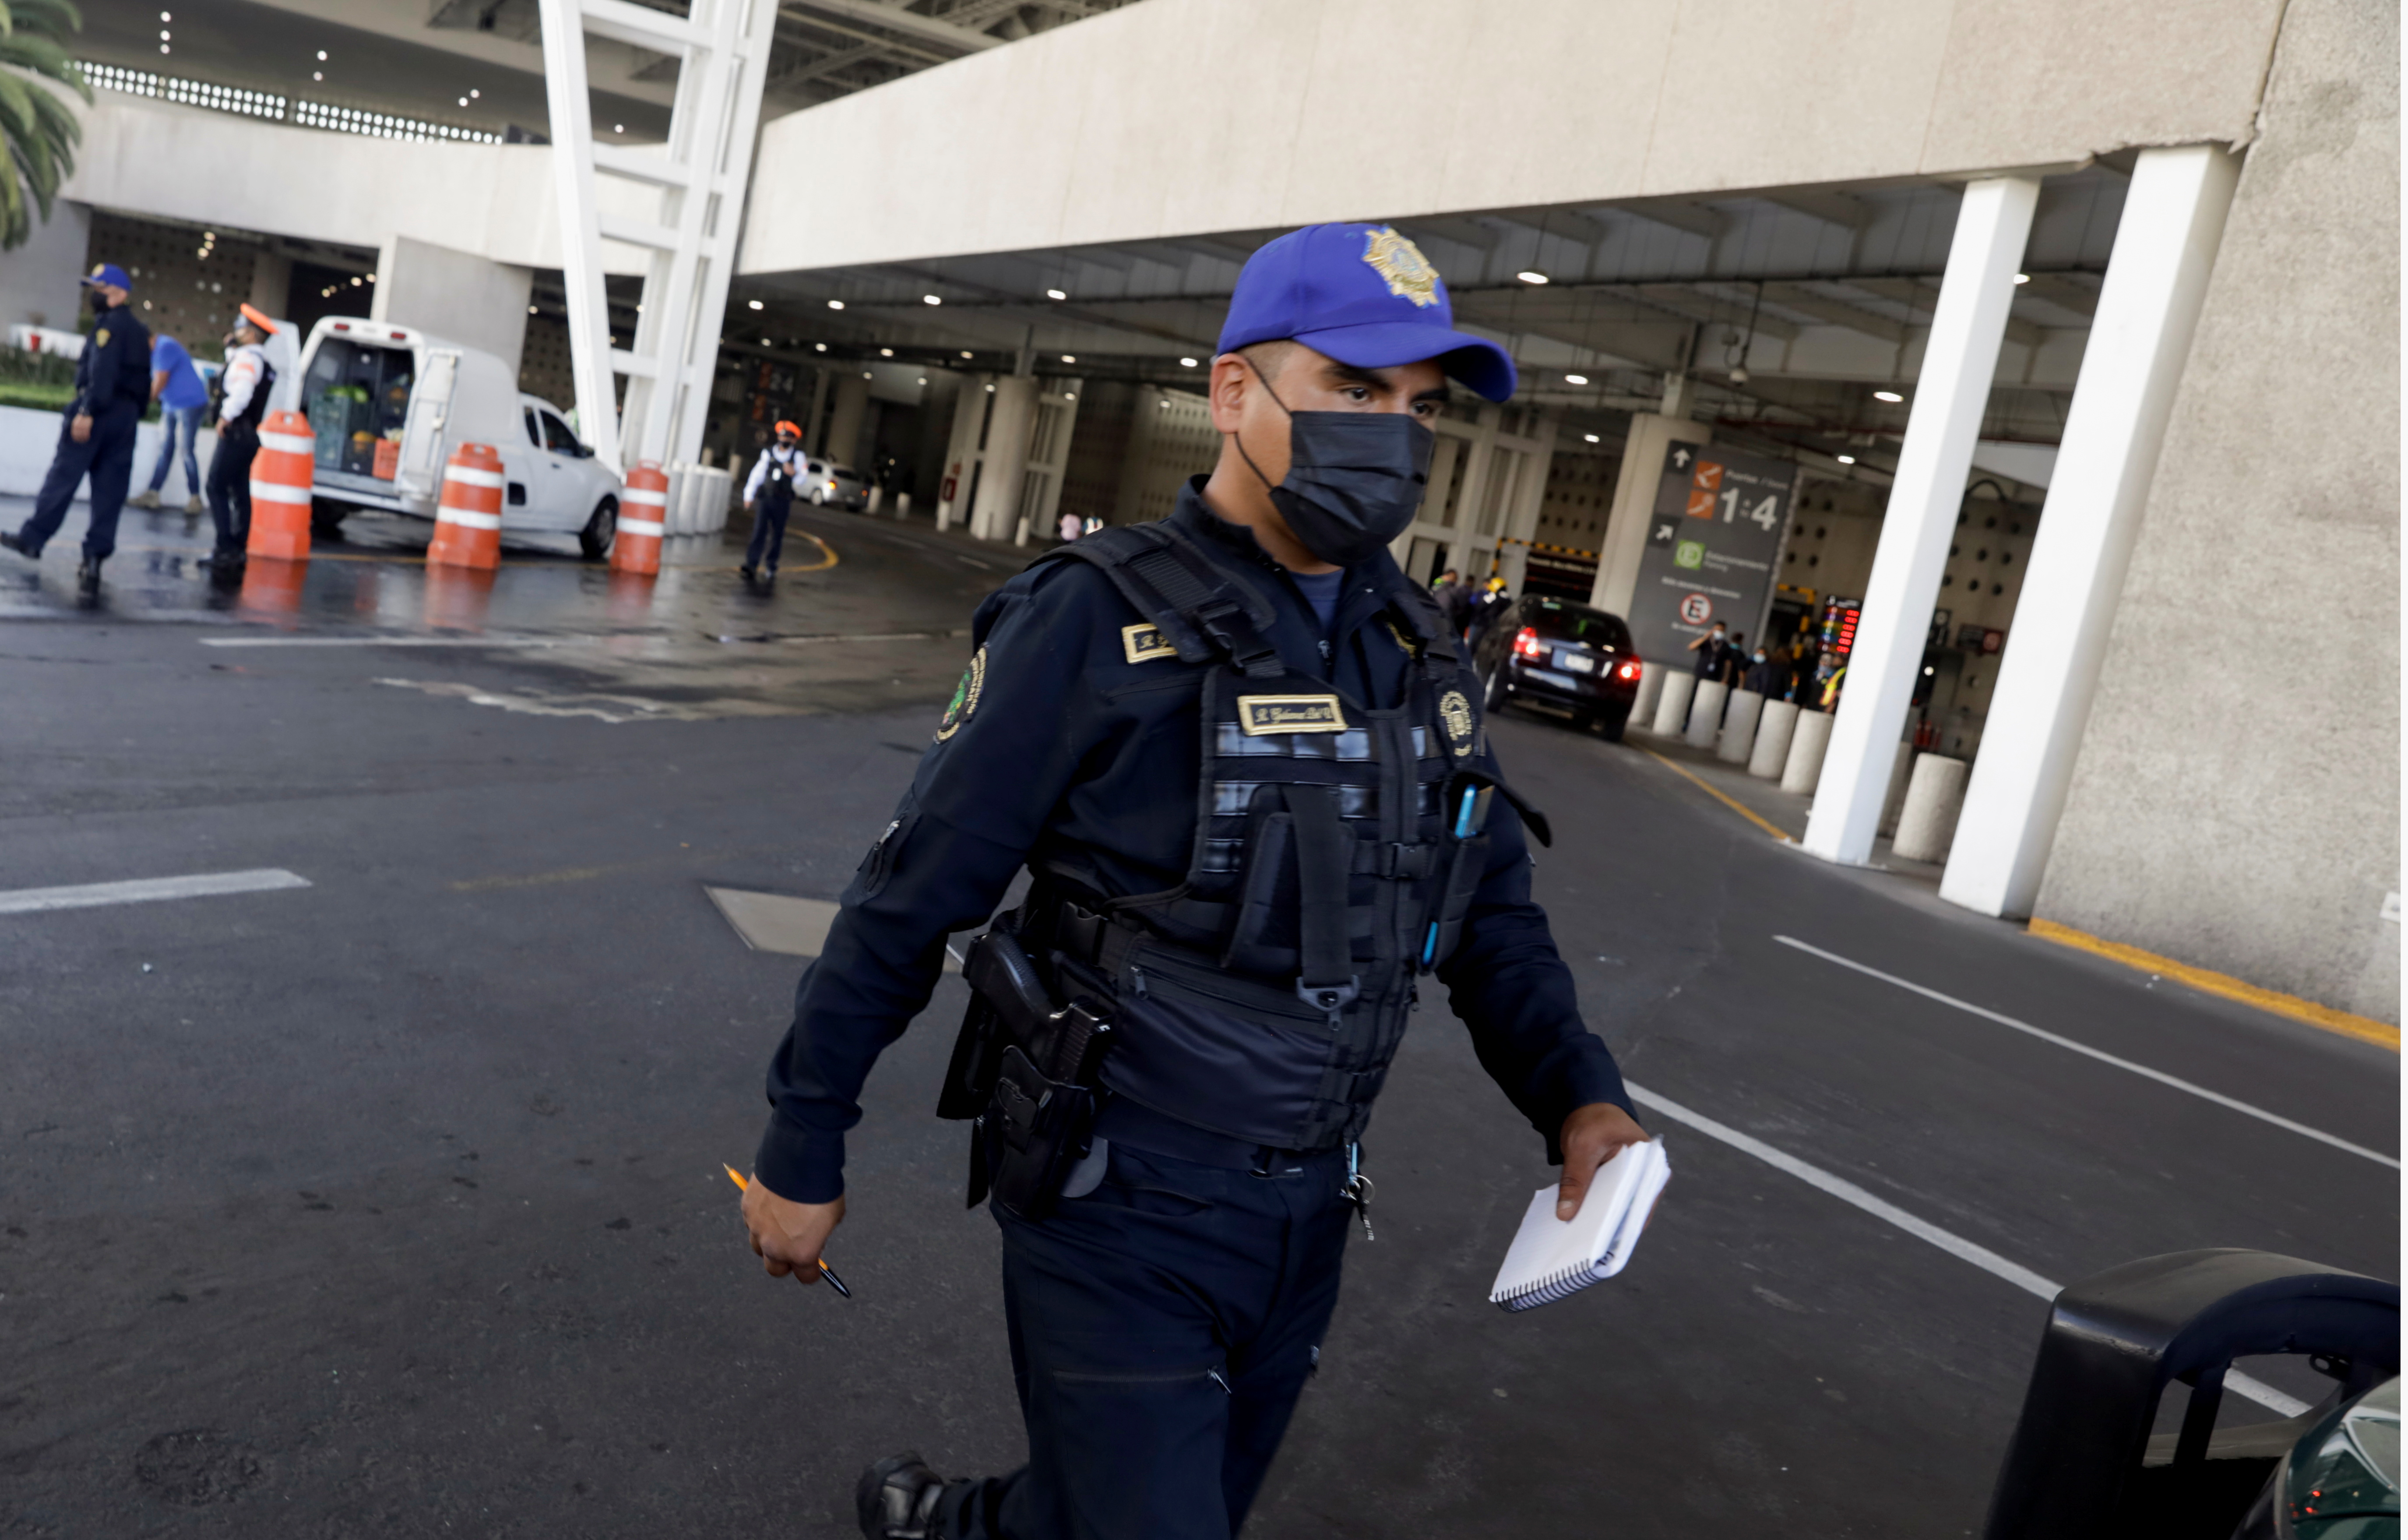 A police officer collects information outside the airport, in Mexico City